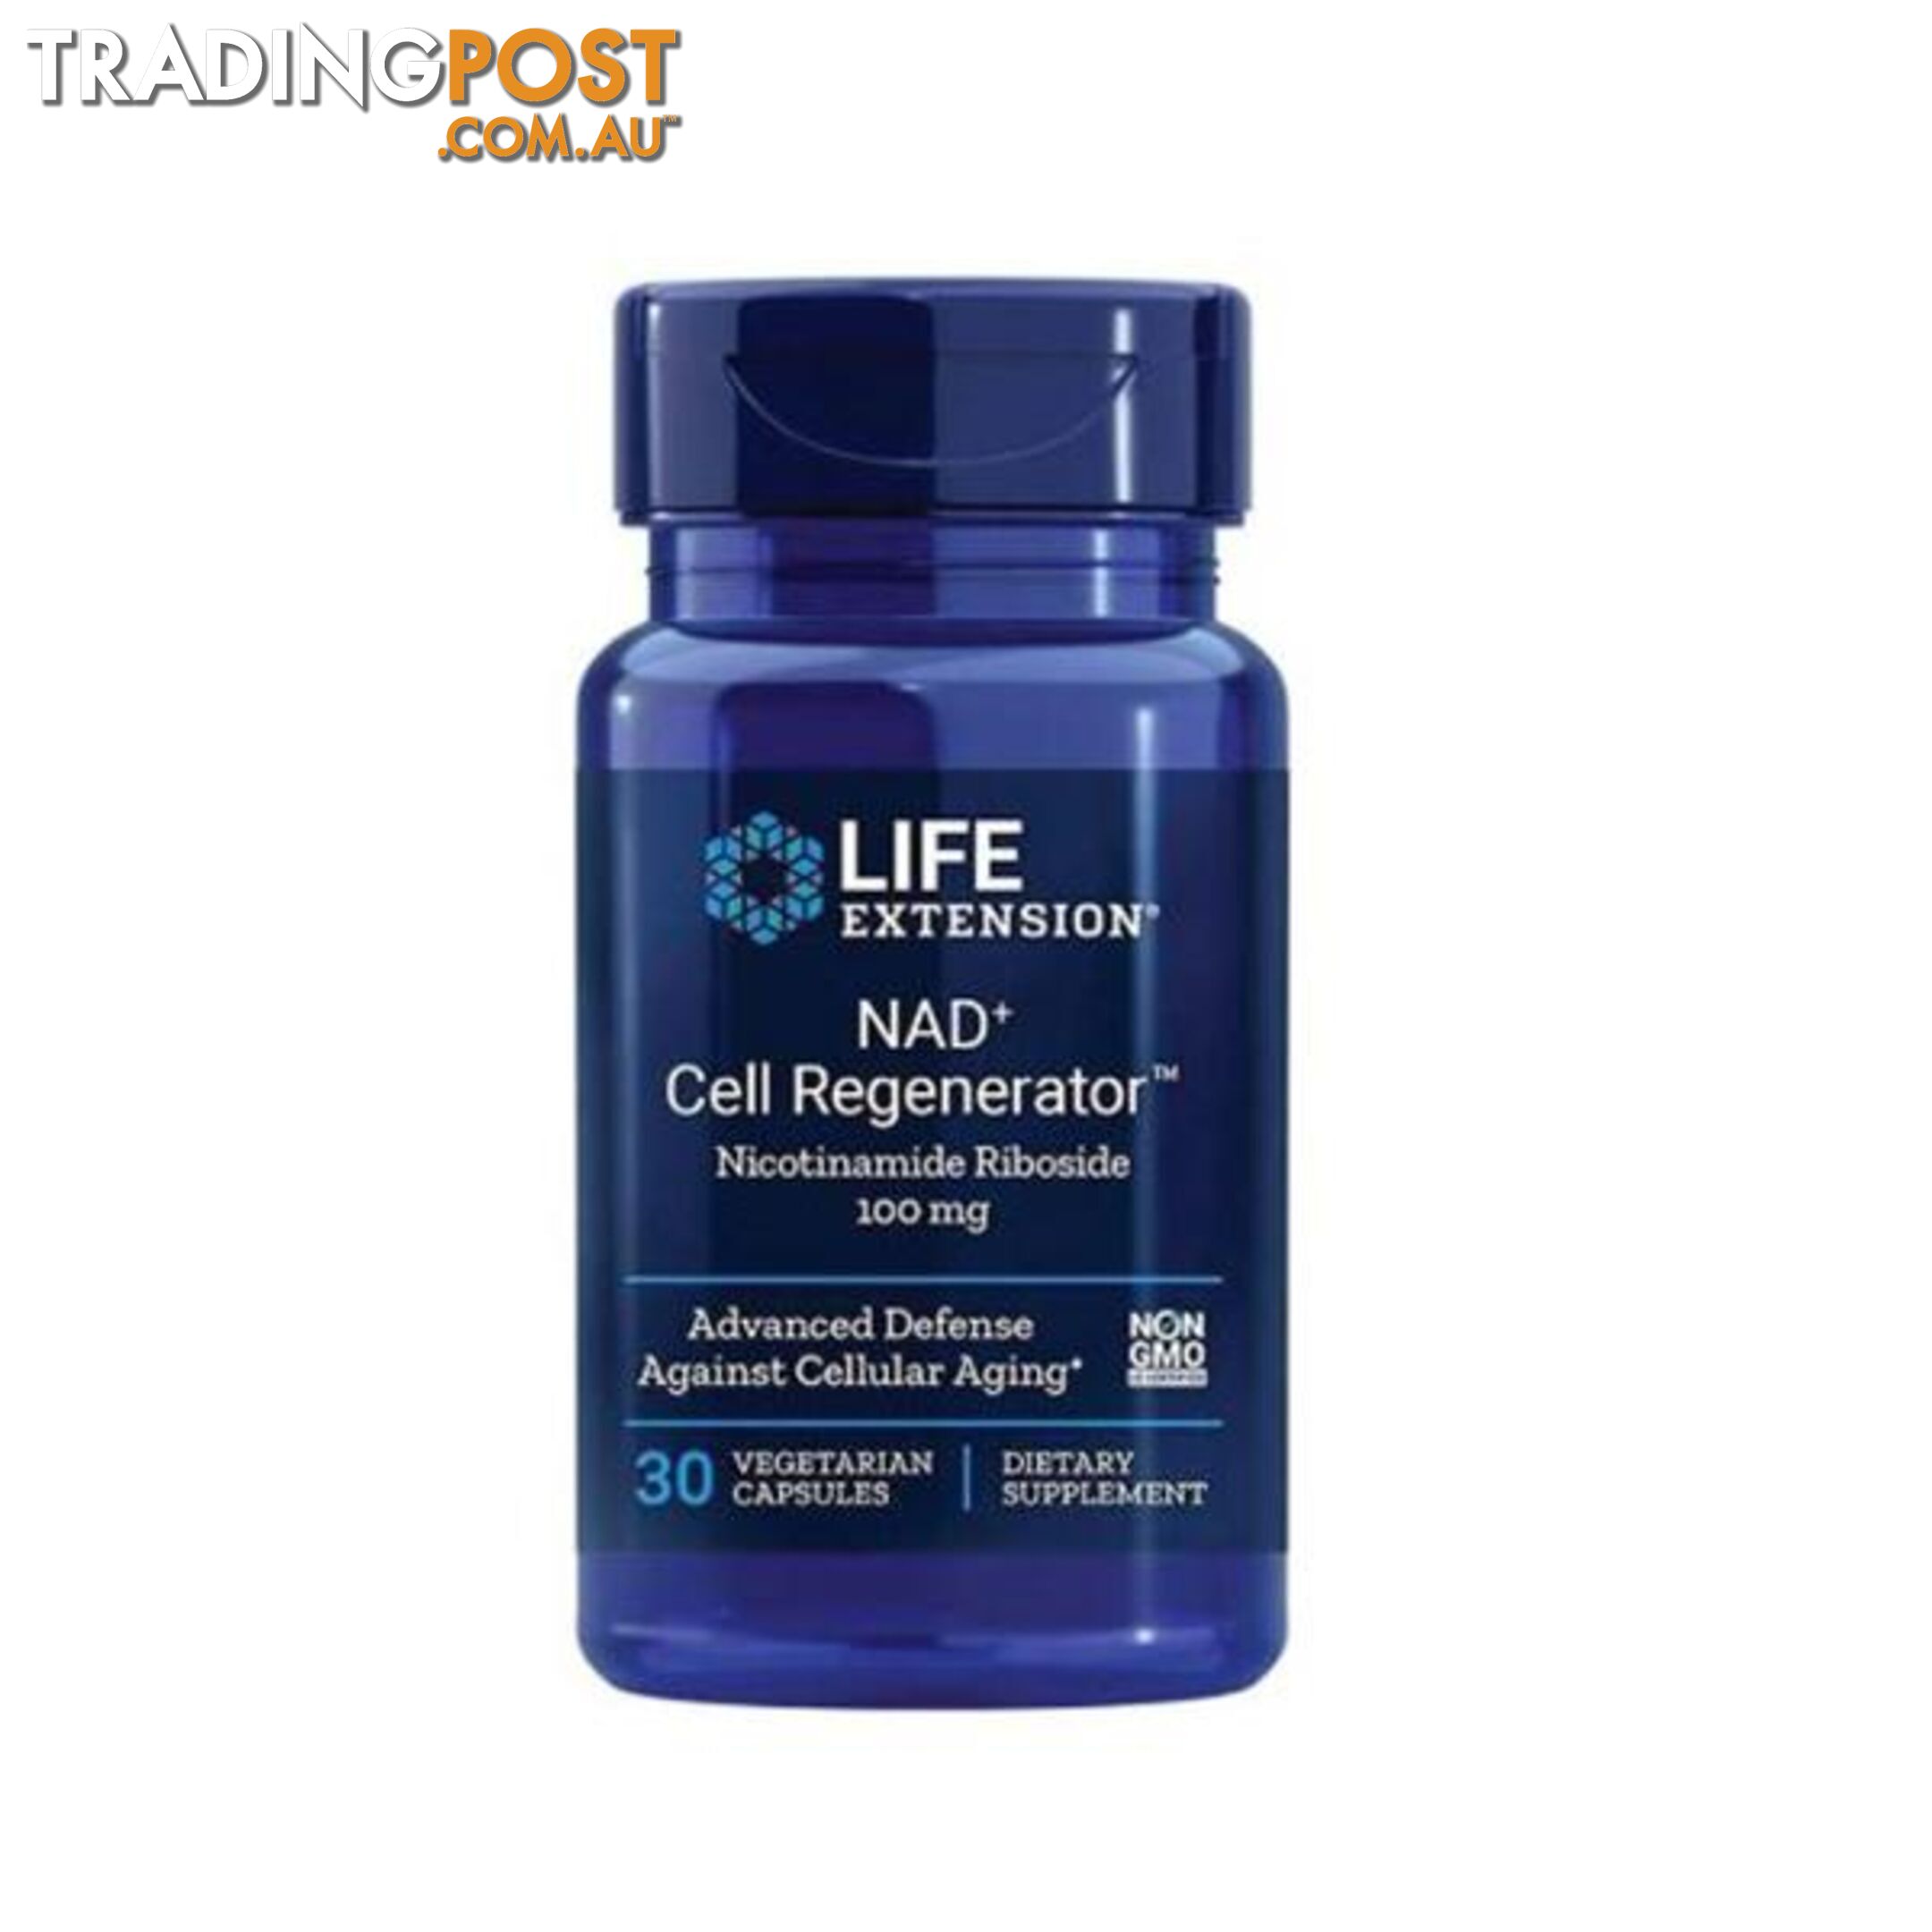 100Mg Nadcell Regenerator Life Extension Capsules - Life Extension - 9476062139995